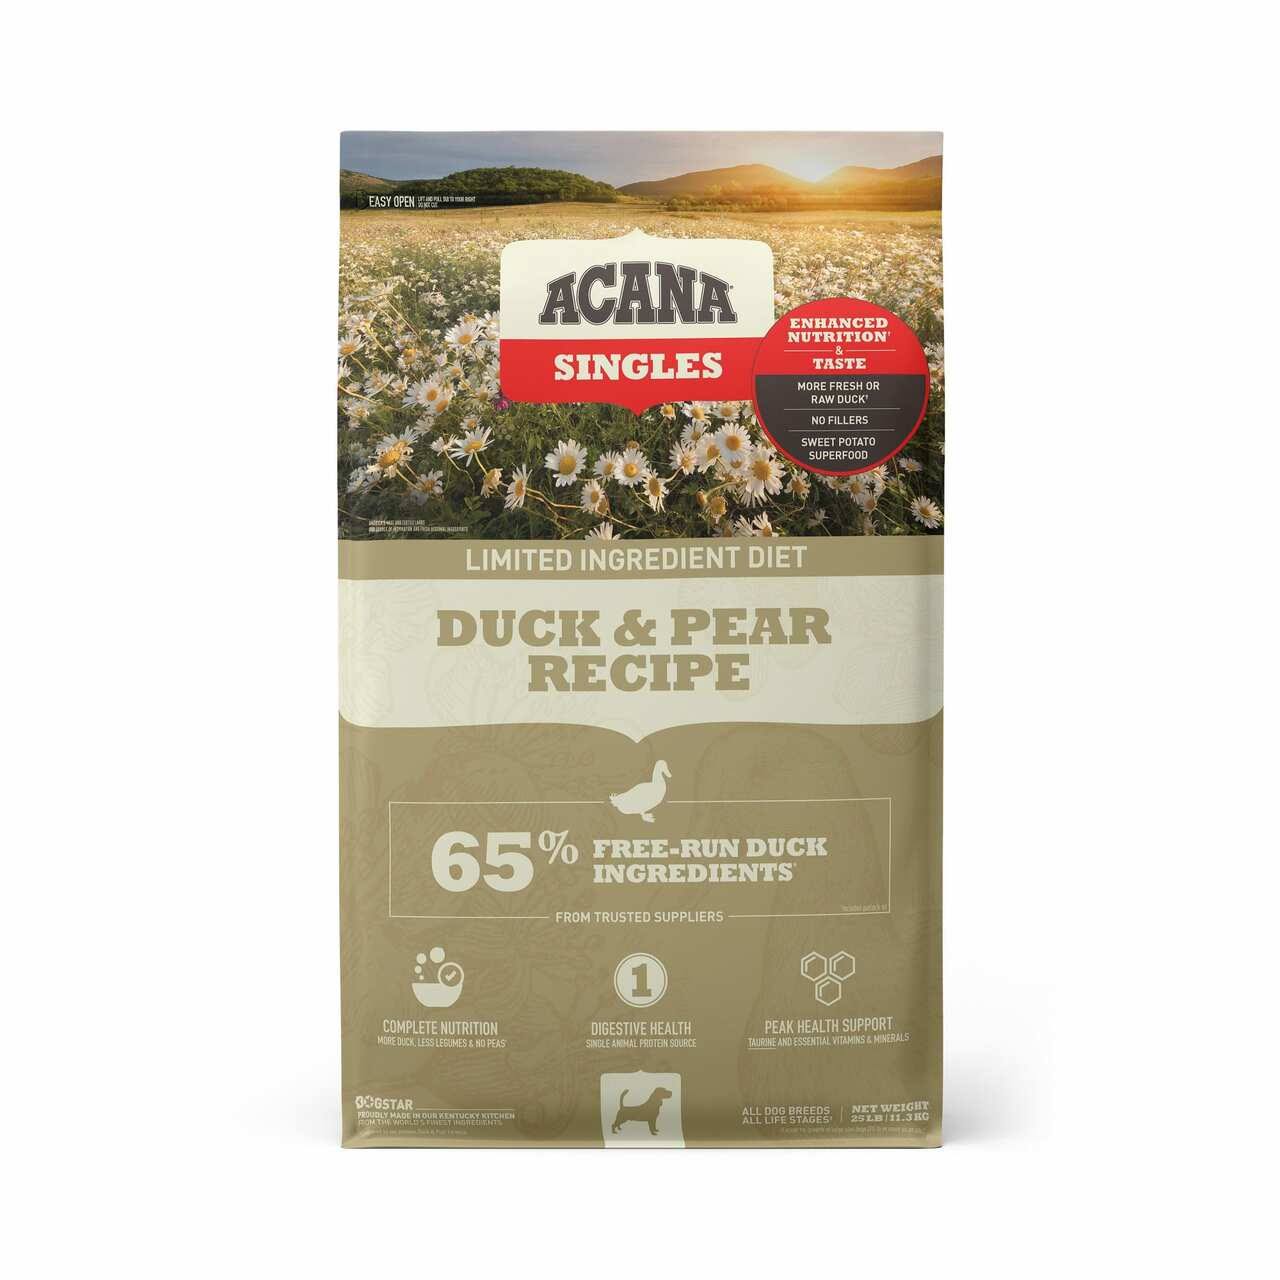 Acana Singles Limited Ingredient Diet Duck & Pear Recipe Grain-Free Dry Dog Food 25 LB